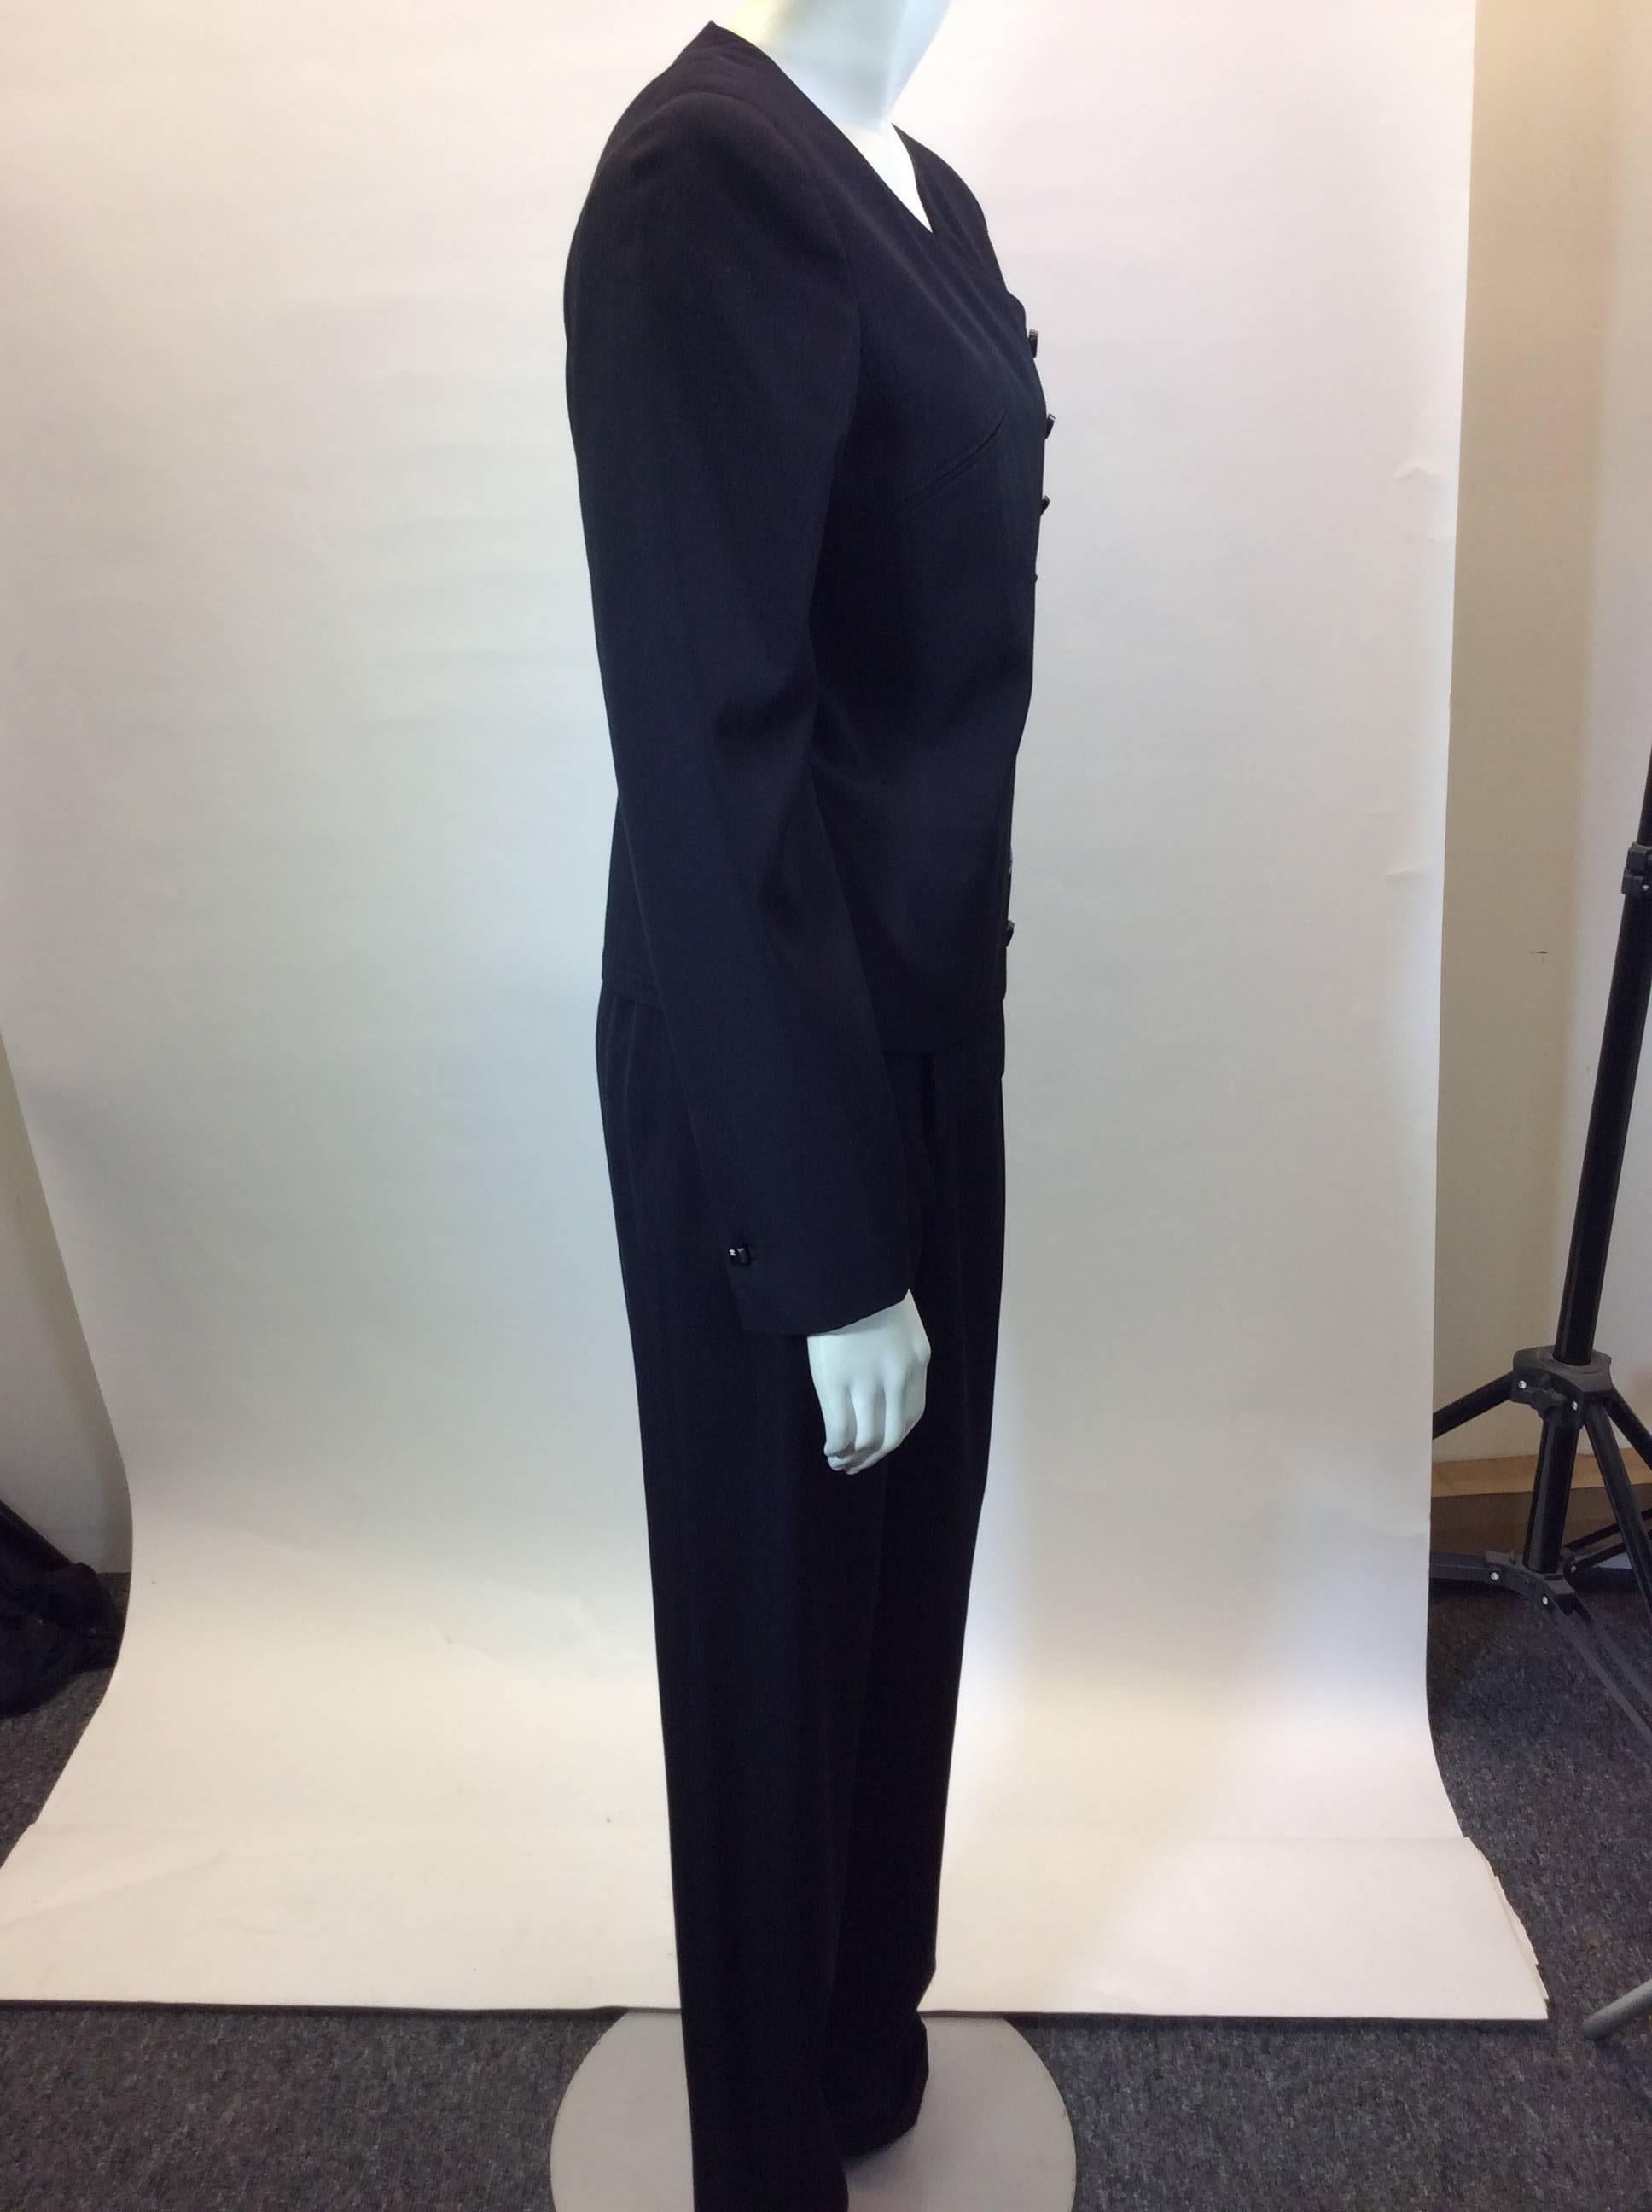 Chanel Black Pant Suit
Suit is 100% wool
100% silk lined
Buttons going down the side of the blazer spell Gabrielle 
Size 40